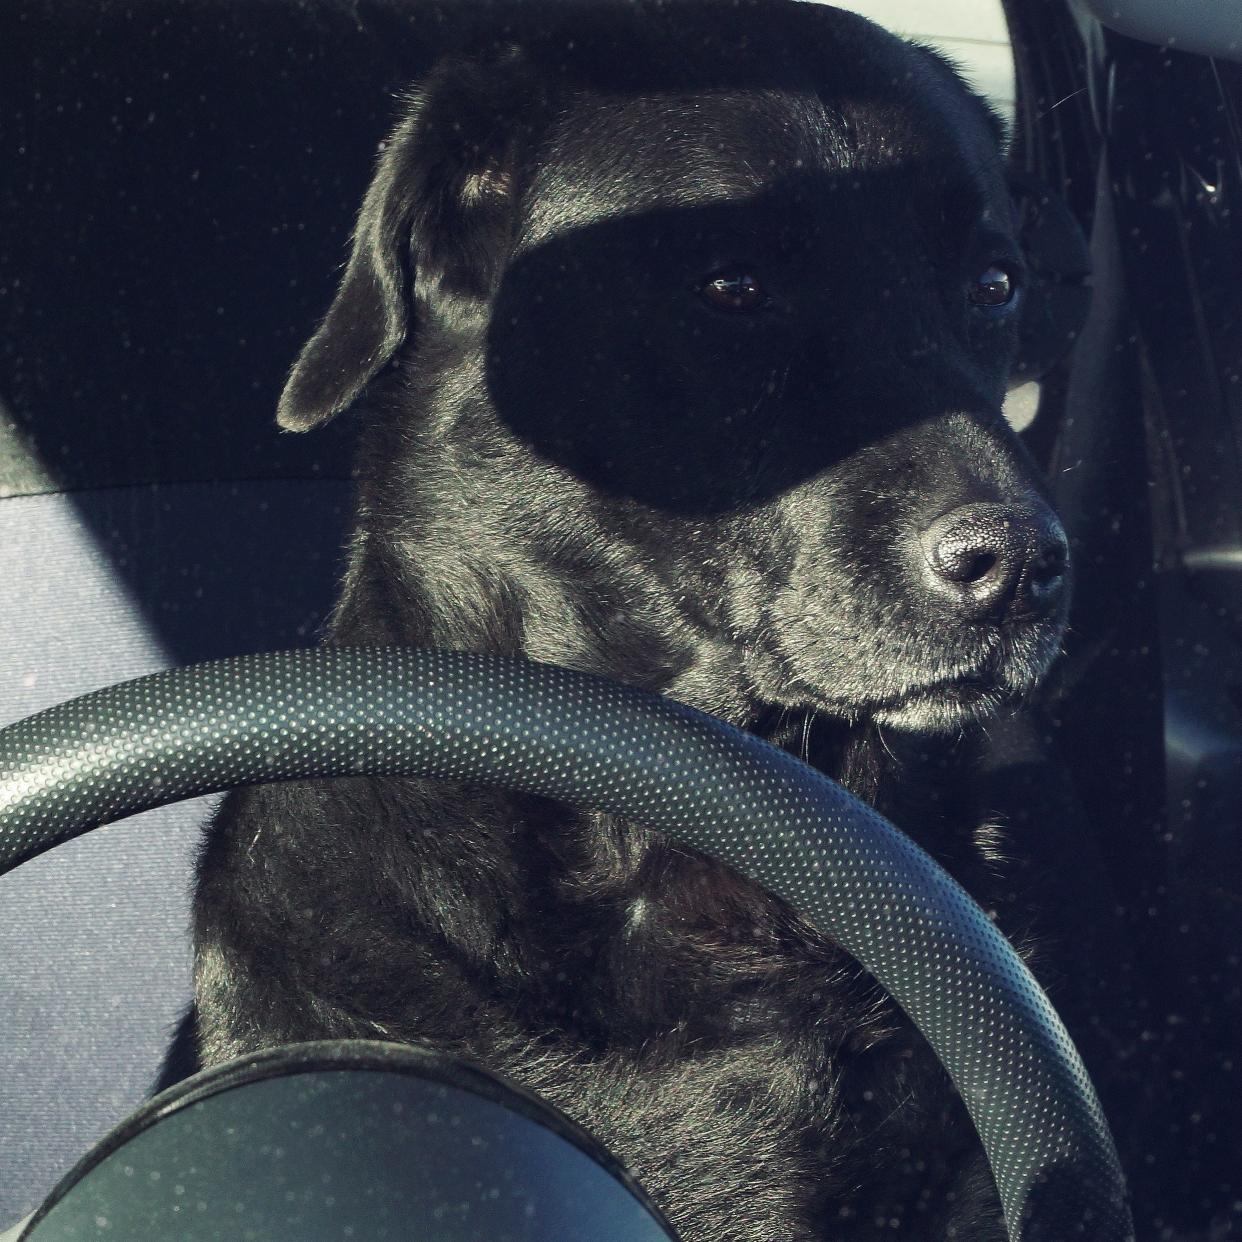 A dog sits in the driver's seat of a car wearing an eye mask.